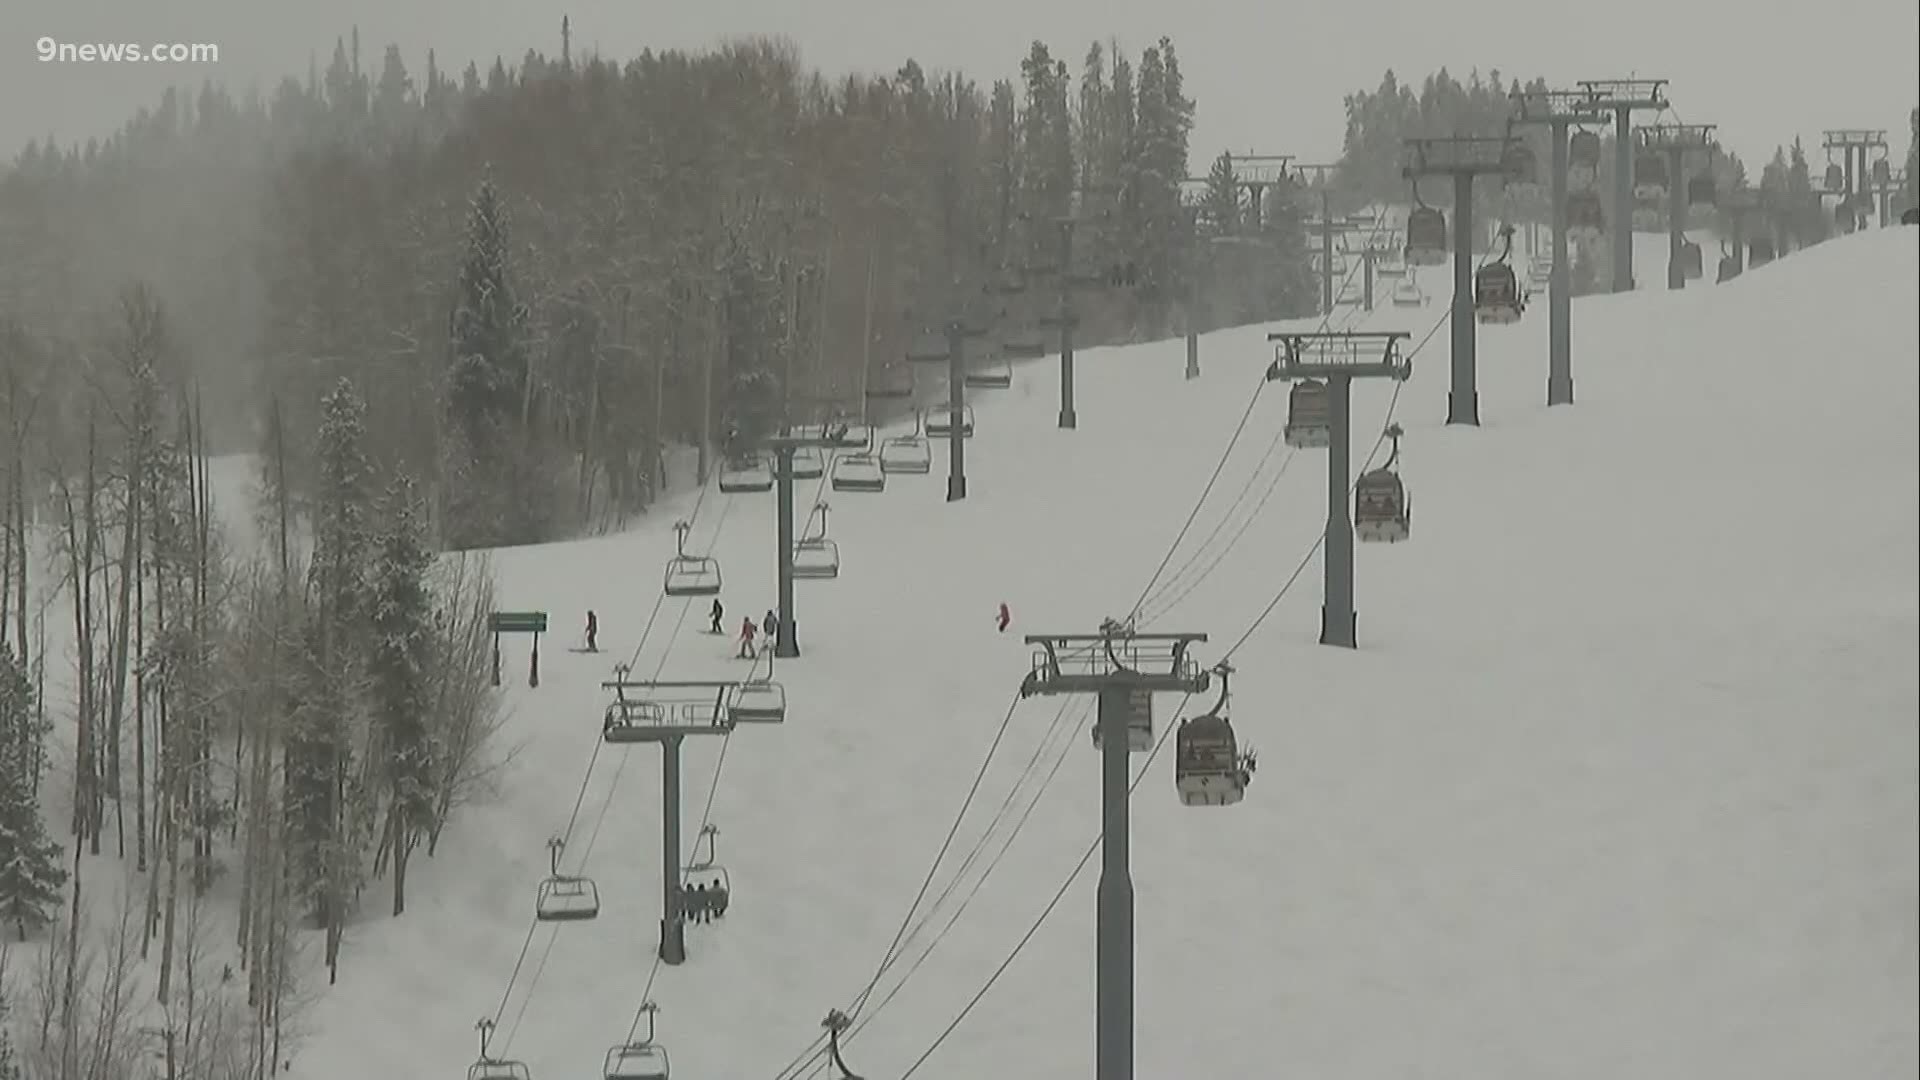 The company hopes to have lifts turning at all of its resorts by late June or July.